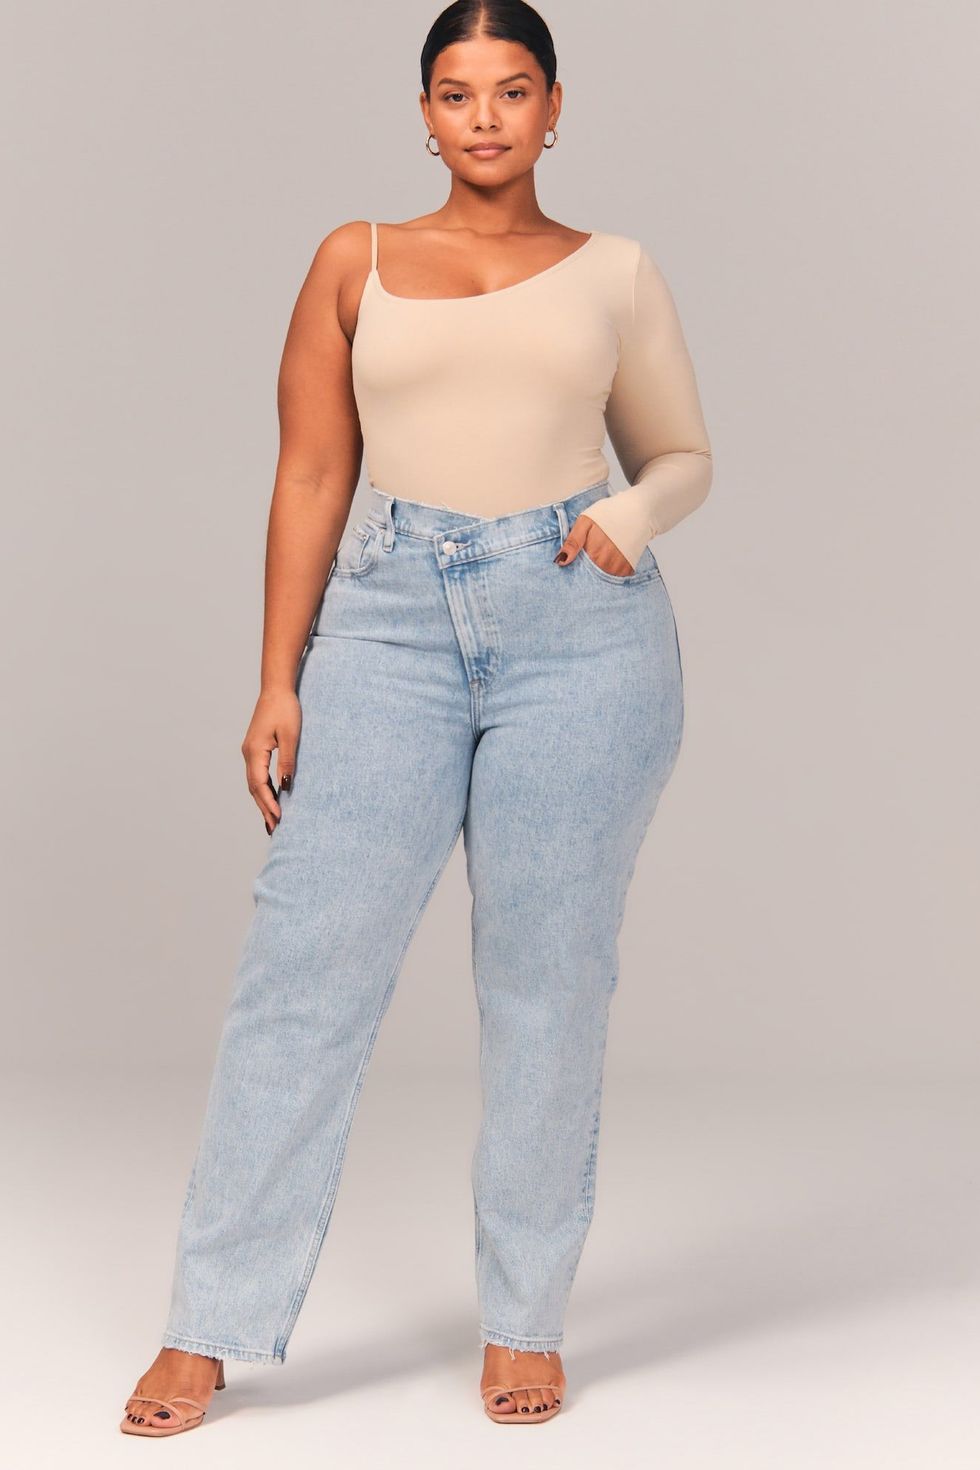 Jeans For Tall Women, Tall Jeans